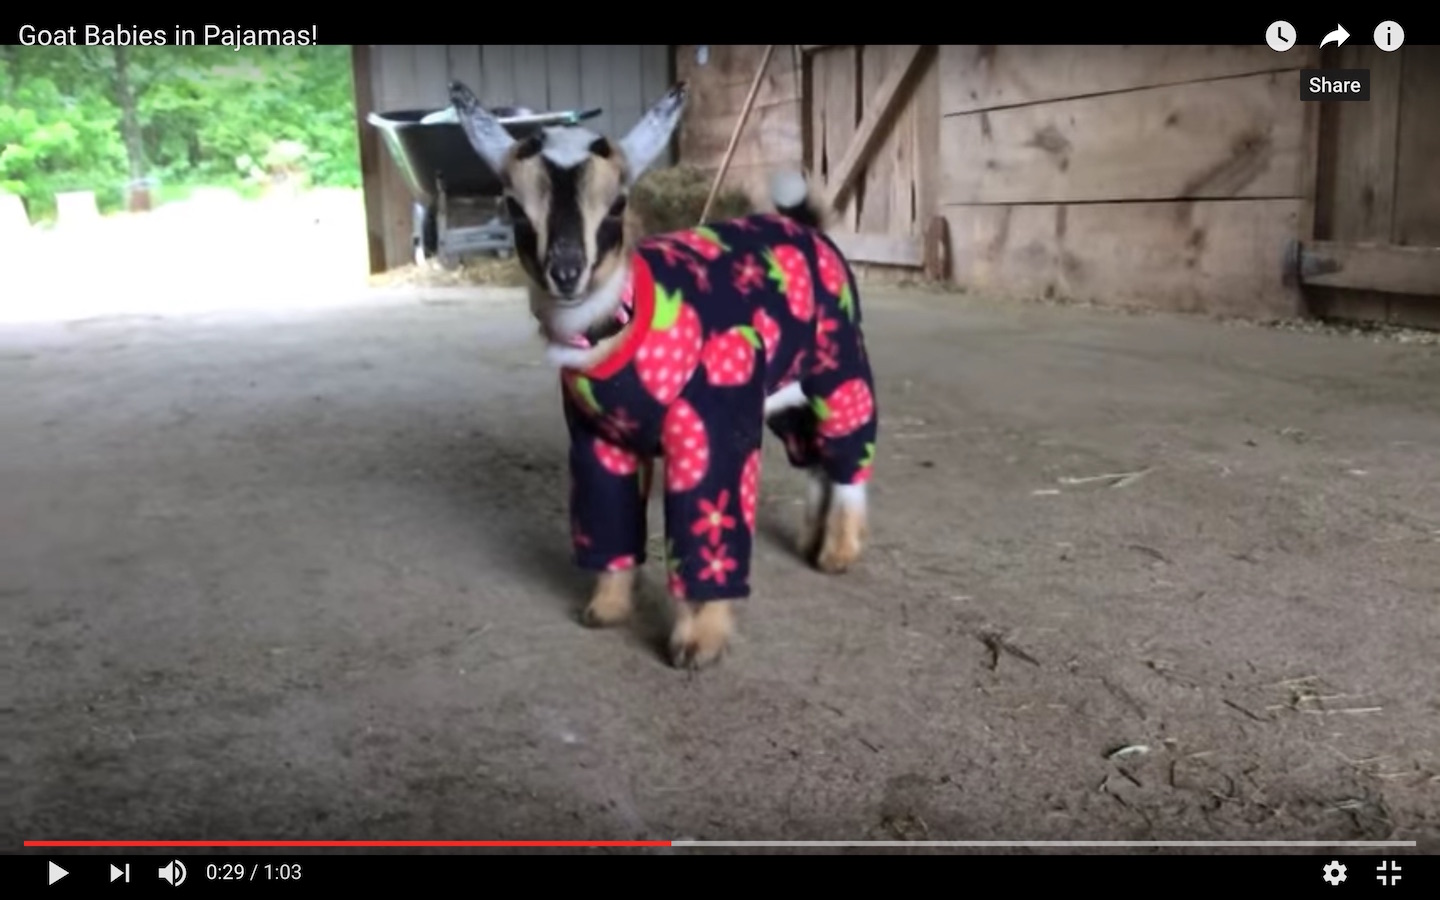 A baby goat standing in barn wearing infant pajamas with strawberries or raspberries on it. It's hard to tell.